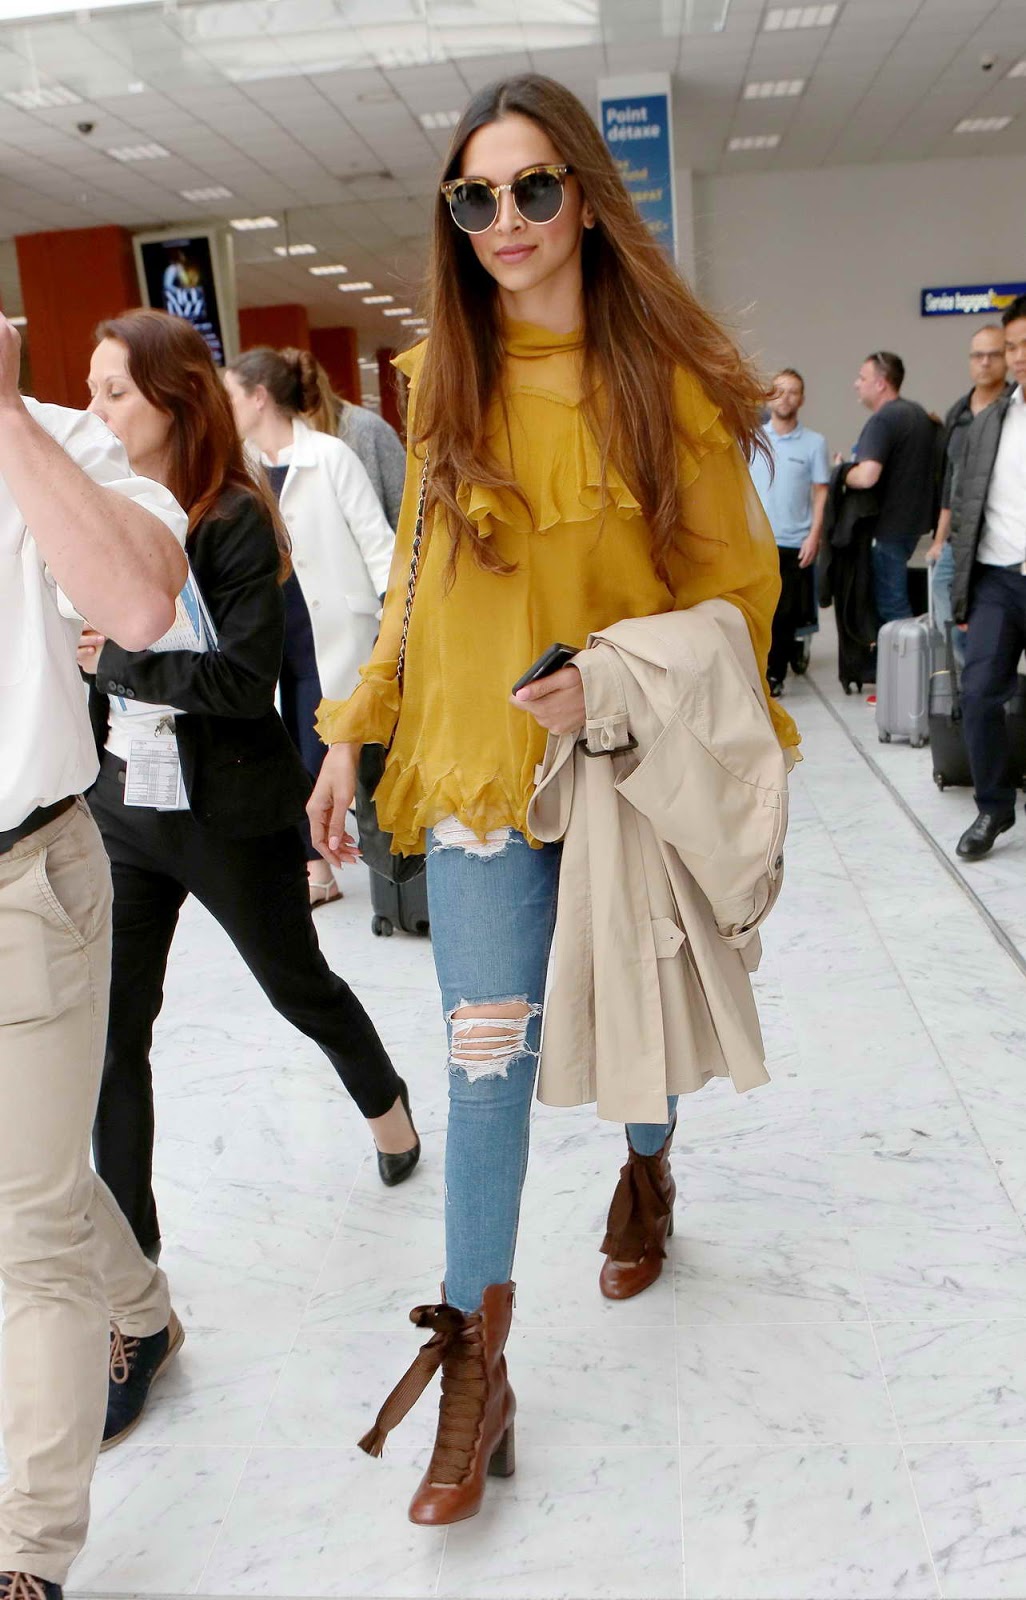 Deepika Padukone Looks Gorgeous As She Arrives At Nice CÃ´te d'Azur International Airport For The 70th Cannes Film Festival 2017 in France